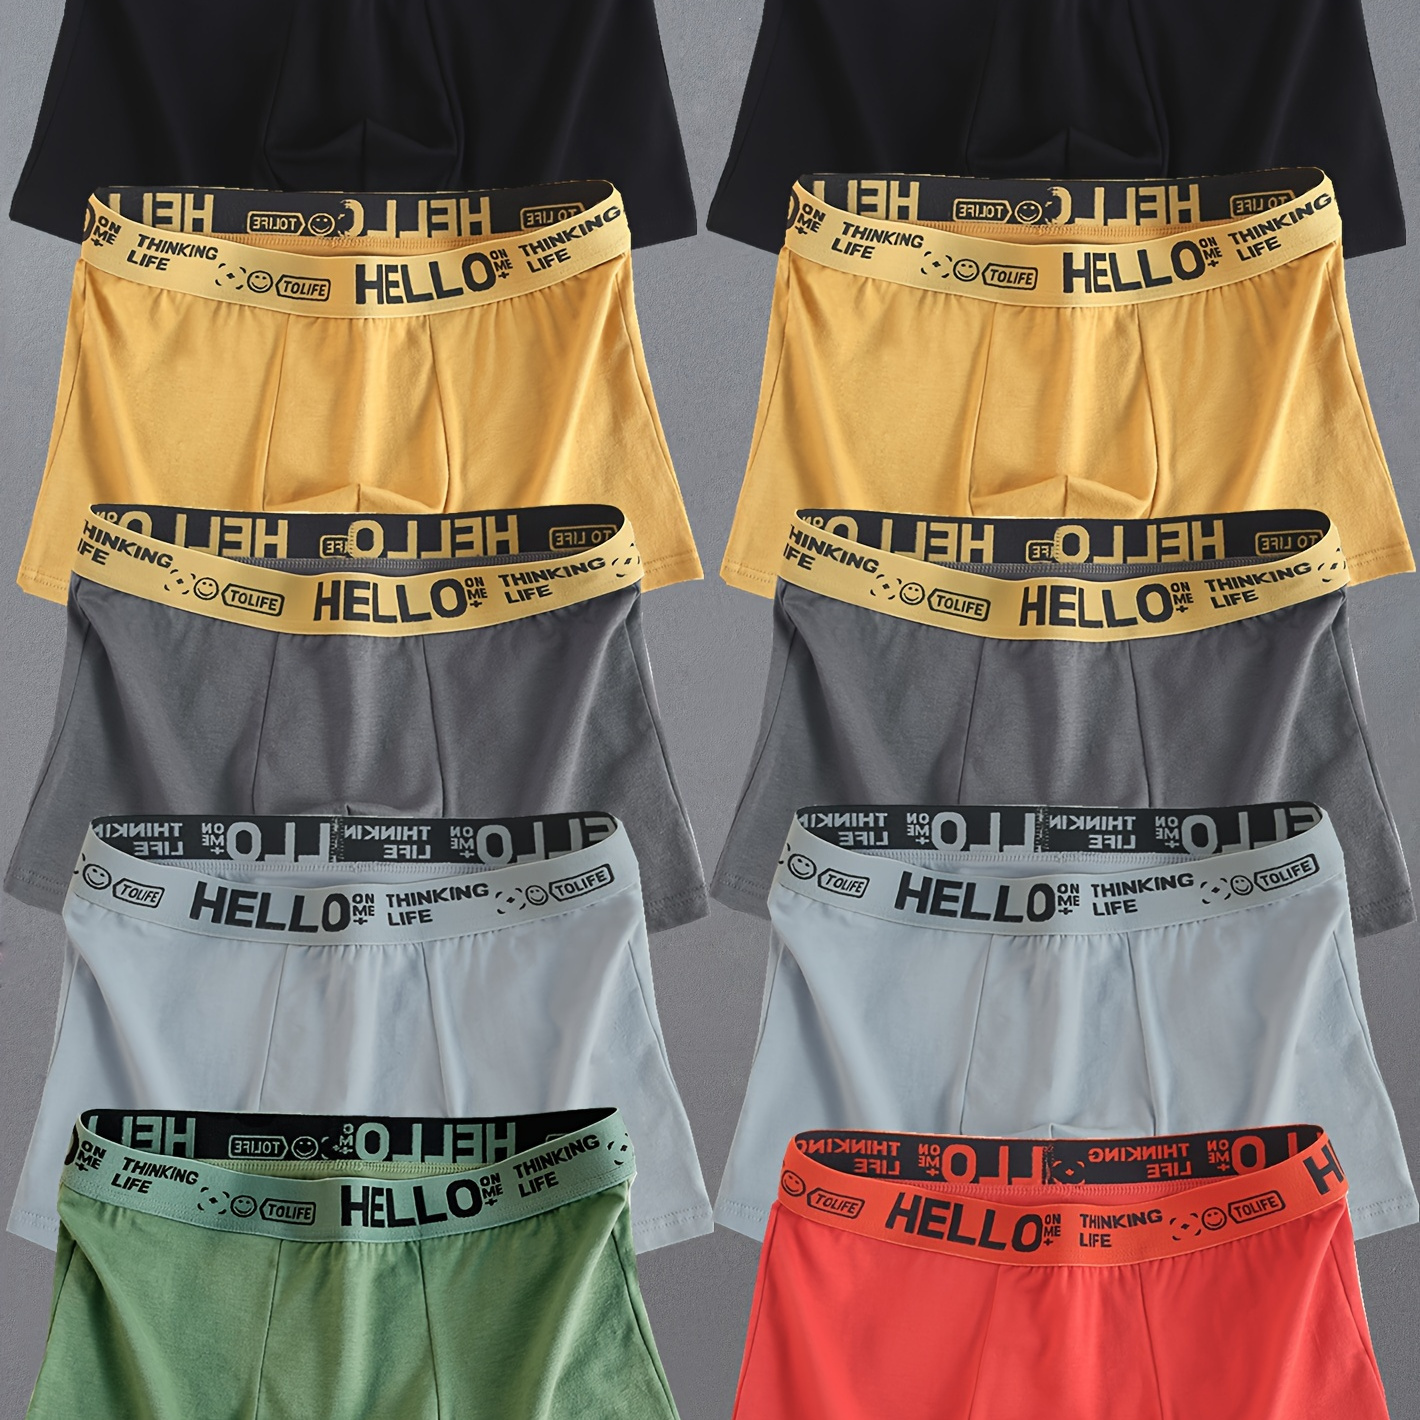 

10pcs 'hello' Prin Men's Cotton Breathable Comfy Stretchy Quick Drying Boxer Briefs Shorts, Sports Trunks, Men's Trendy Underwear